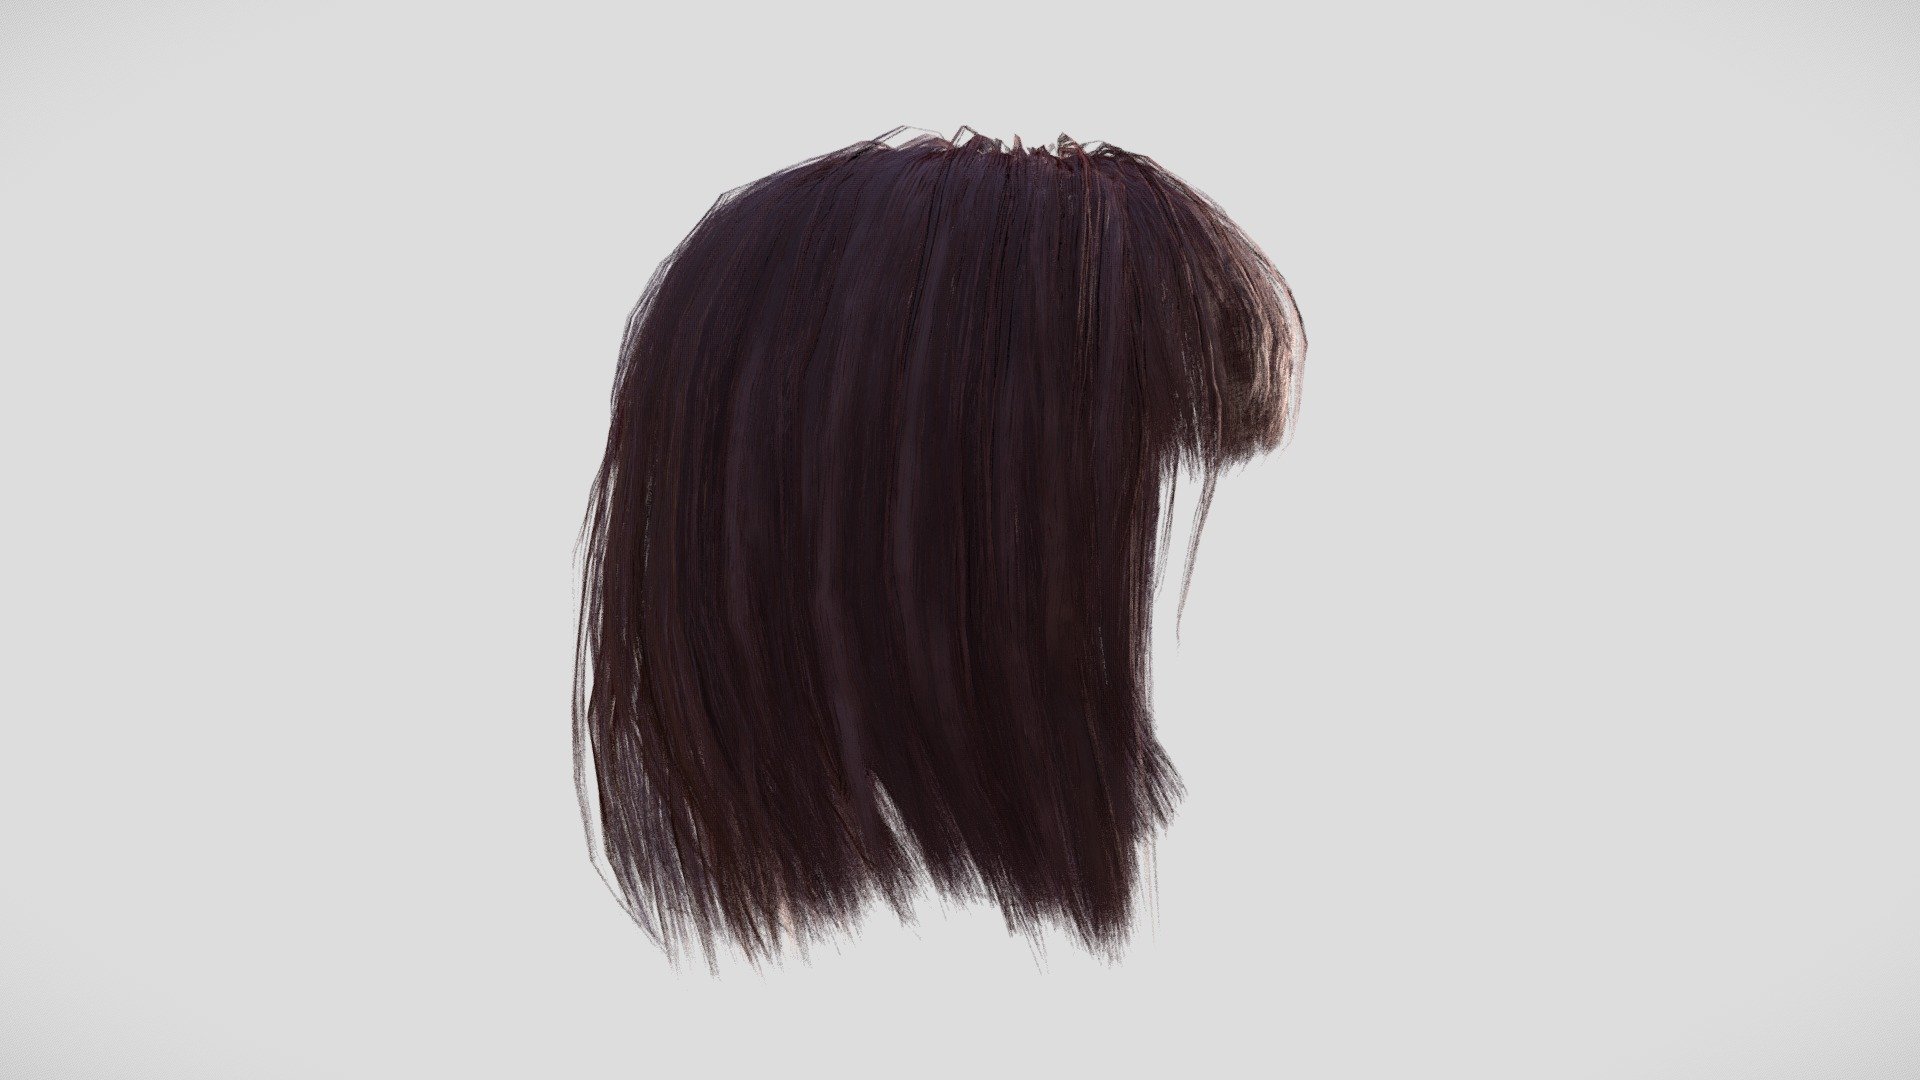 Hairstyle for your 3d character!

GEOMETRY:
The haircut is made with quad polygon geometry, a.k.a hair cards. The hair geometry is meticulously constructed with a single edge flowing through the center for easy rigging and intuitive spline manipulation.

TEXTURES:(4096x4096):
    o - used to simulate Ambient Occlusion effect
    z - used to simulate Unreal's Pixel Depth Offset effect
    flow - used to control the direction of reflection normal
    id - used for cross-strand color variation
    op - used to manipulate opacity or alpha
    root - used for gradual root coloring along the flow of the strand
    base - Base texture

The textures are compatible with the new Smart Hair system within Reallusion Character Creator, which is made to be used with both UnrealEngine and Unity.

EXTRA:
The hairstyle also includes the scalp geometry and textures to prevent the skin from peaking through the hair strands thus creating an unrealistic-looking hairstyle.

Happy characterizing!

**NOTES:
* Head not included - Hair Female - 021 - Buy Royalty Free 3D model by Scanlab Photogrammetry Inc. (@scanlabstudio) 3d model